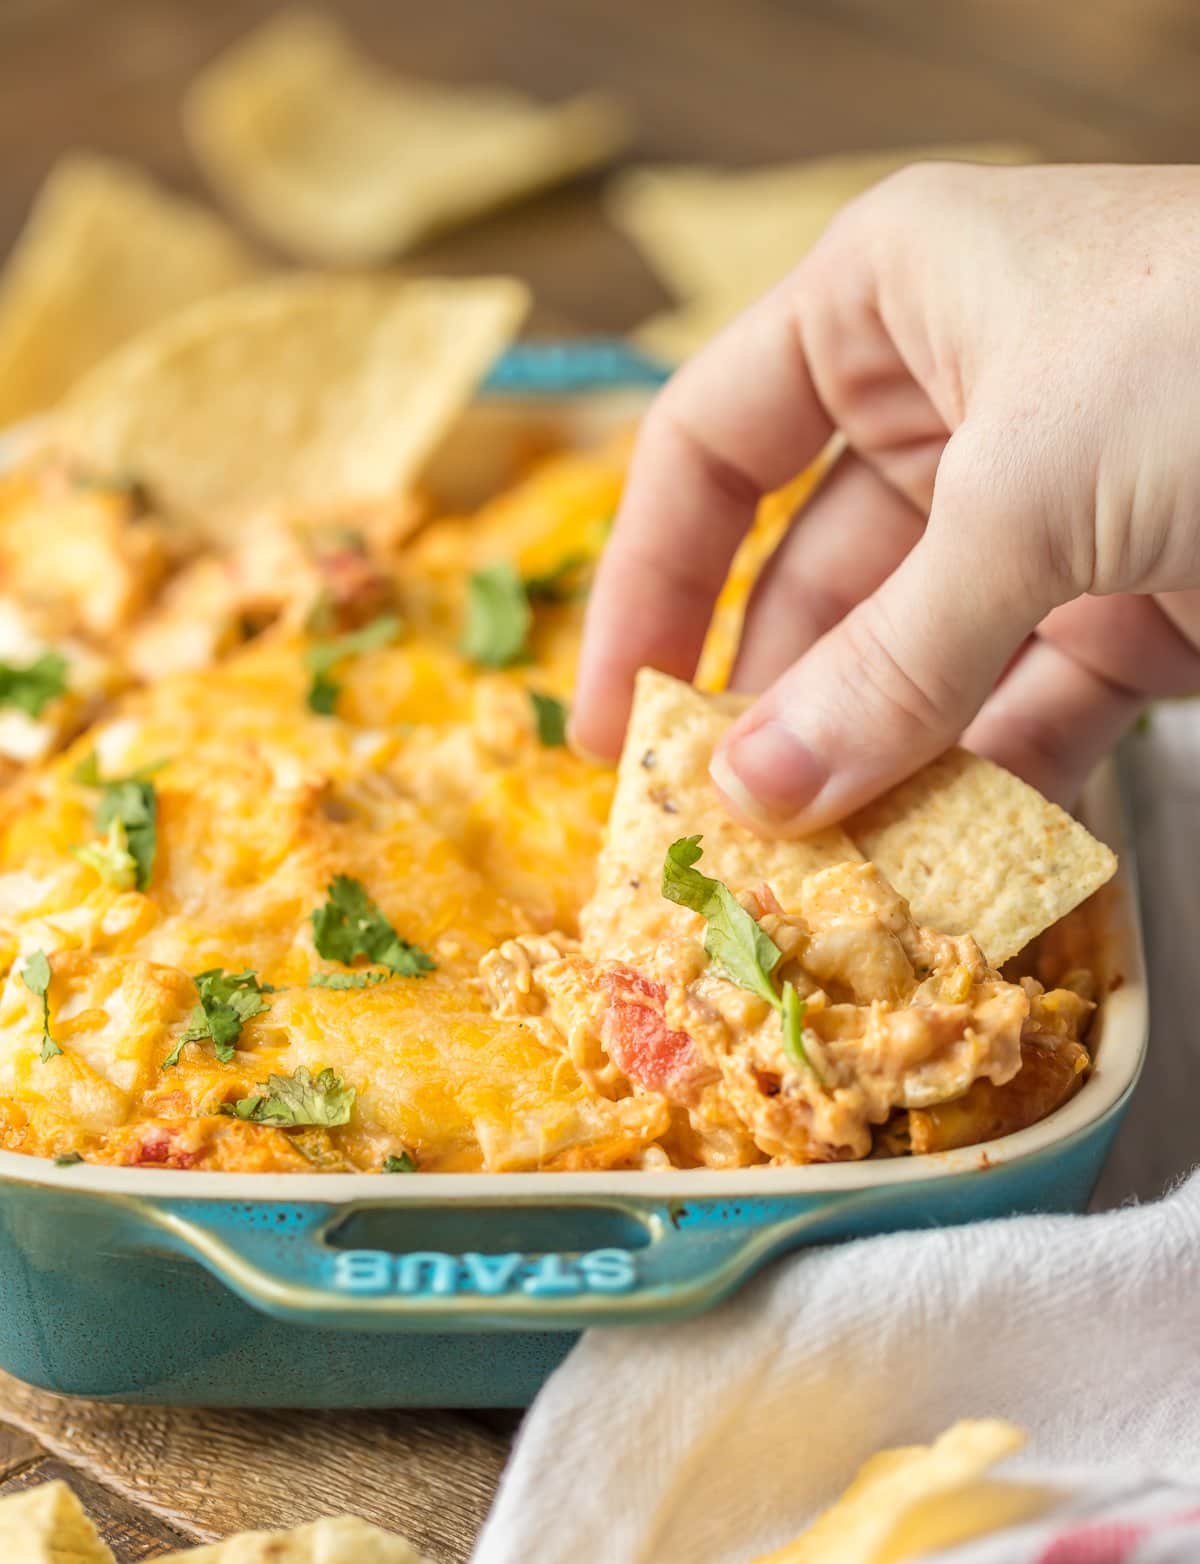 KING RANCH CHICKEN DIP is a fun twist on a classic family favorite casserole. The flavors including chicken, rotel, cheese, and tortillas lend themselves easily to a delicious dip, just perfect for the Super Bowl!